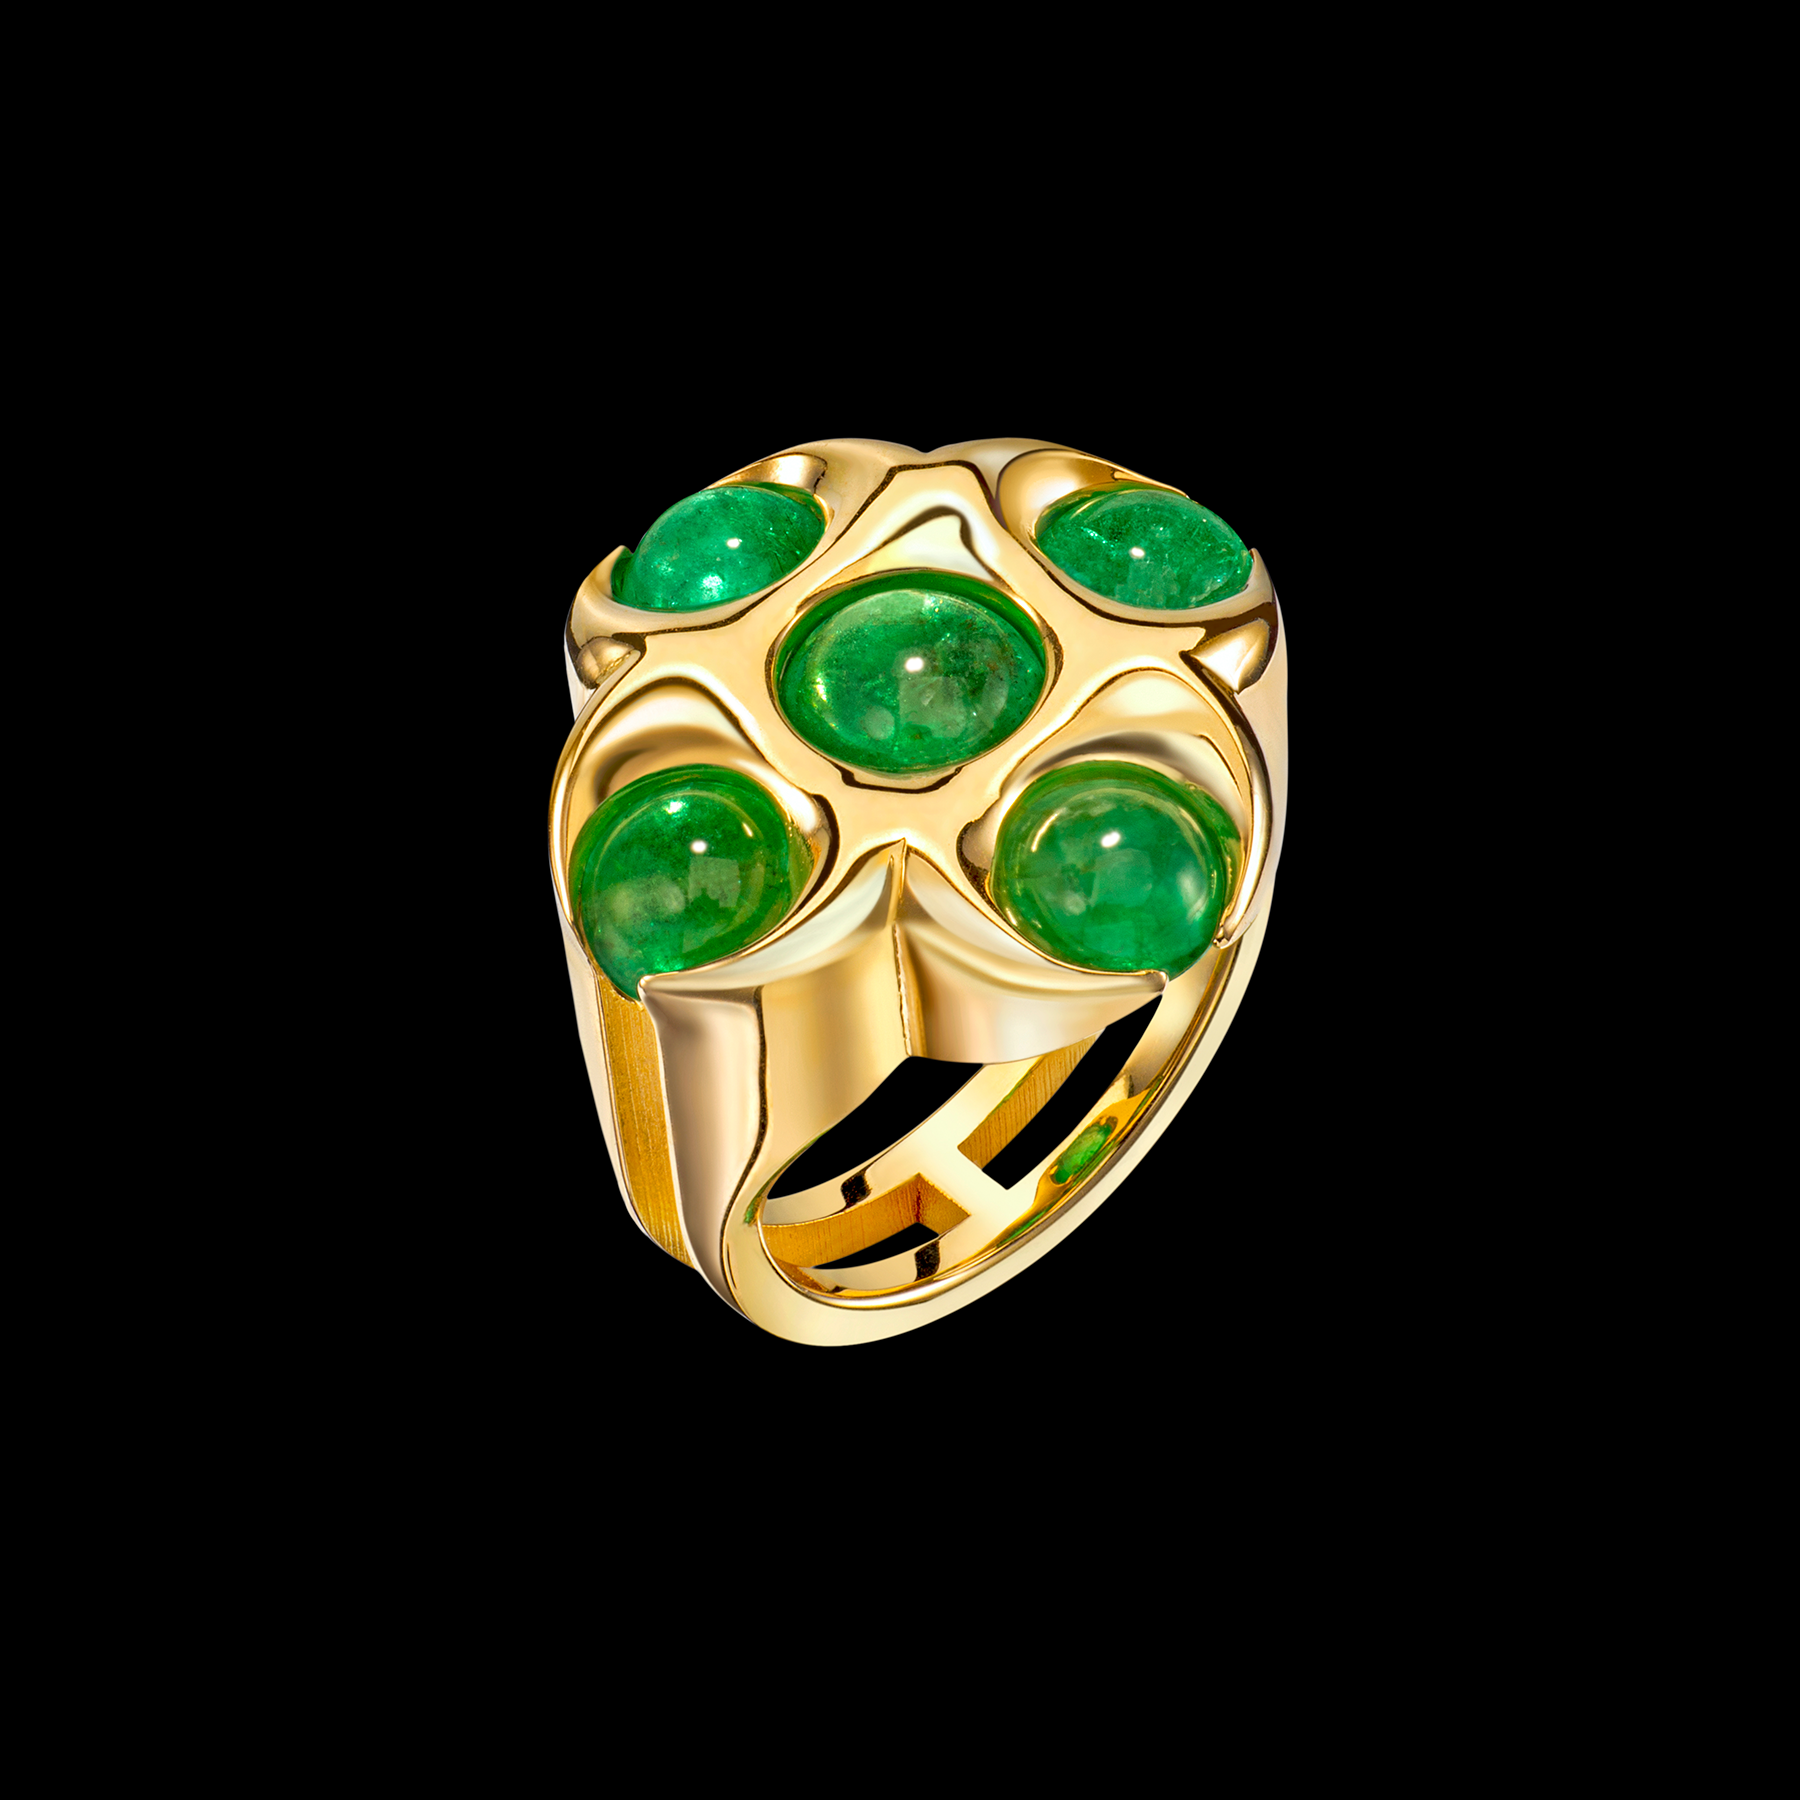 Emerald horns ring by deisgner Solange Azagury-Partridge, 18k Yellow Gold and Emerald - Side view